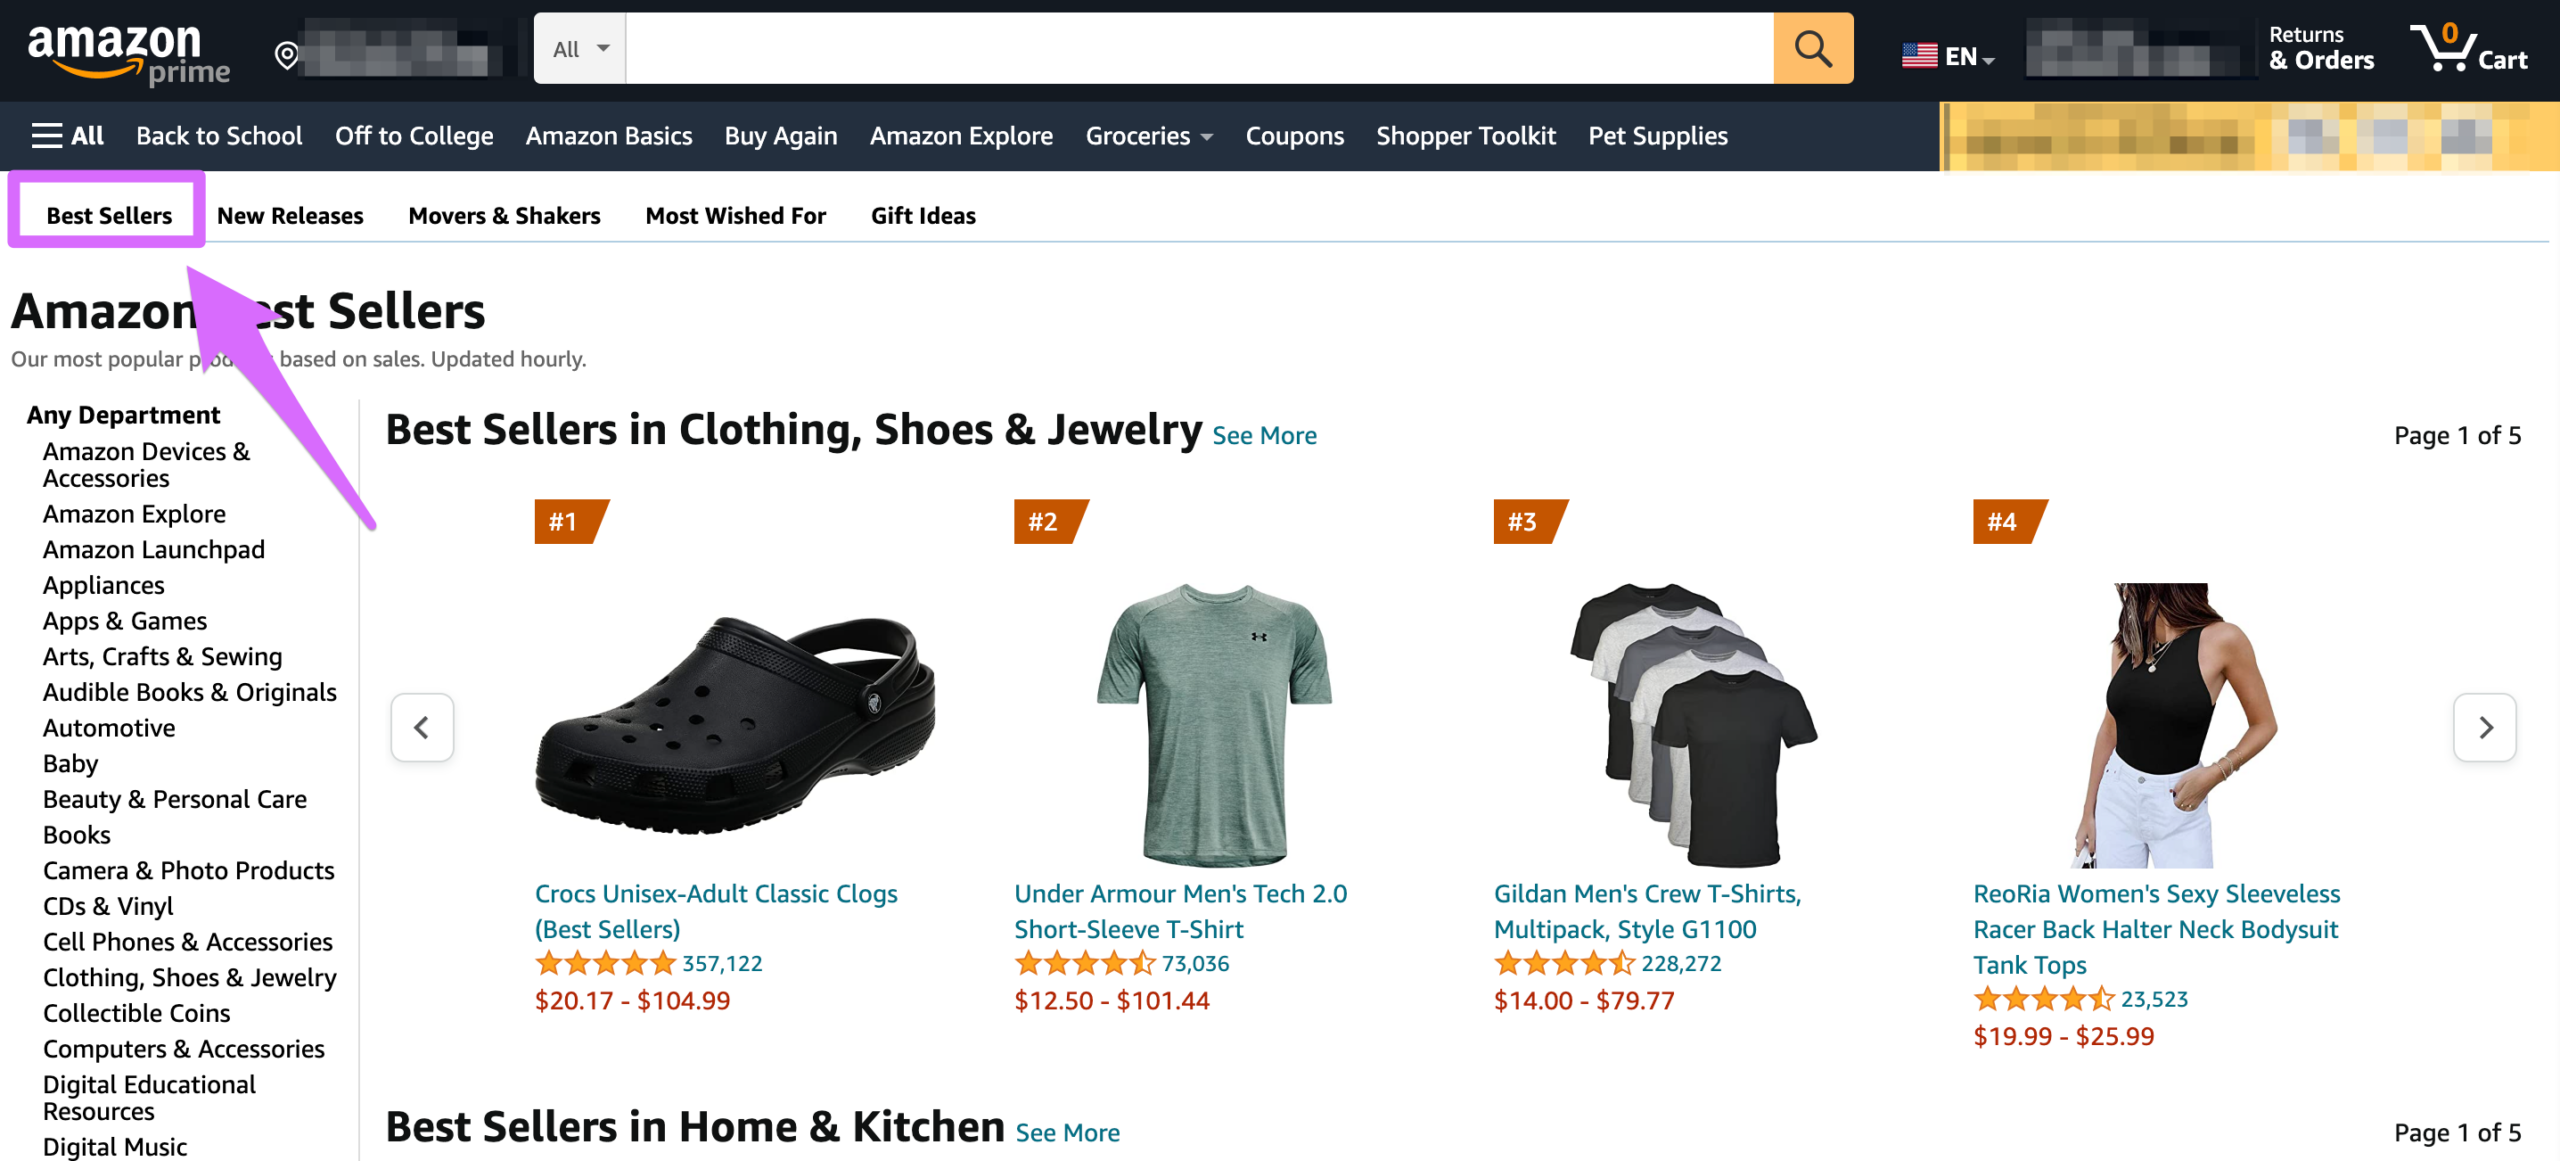 amazon best sellers to help make more affiliate income